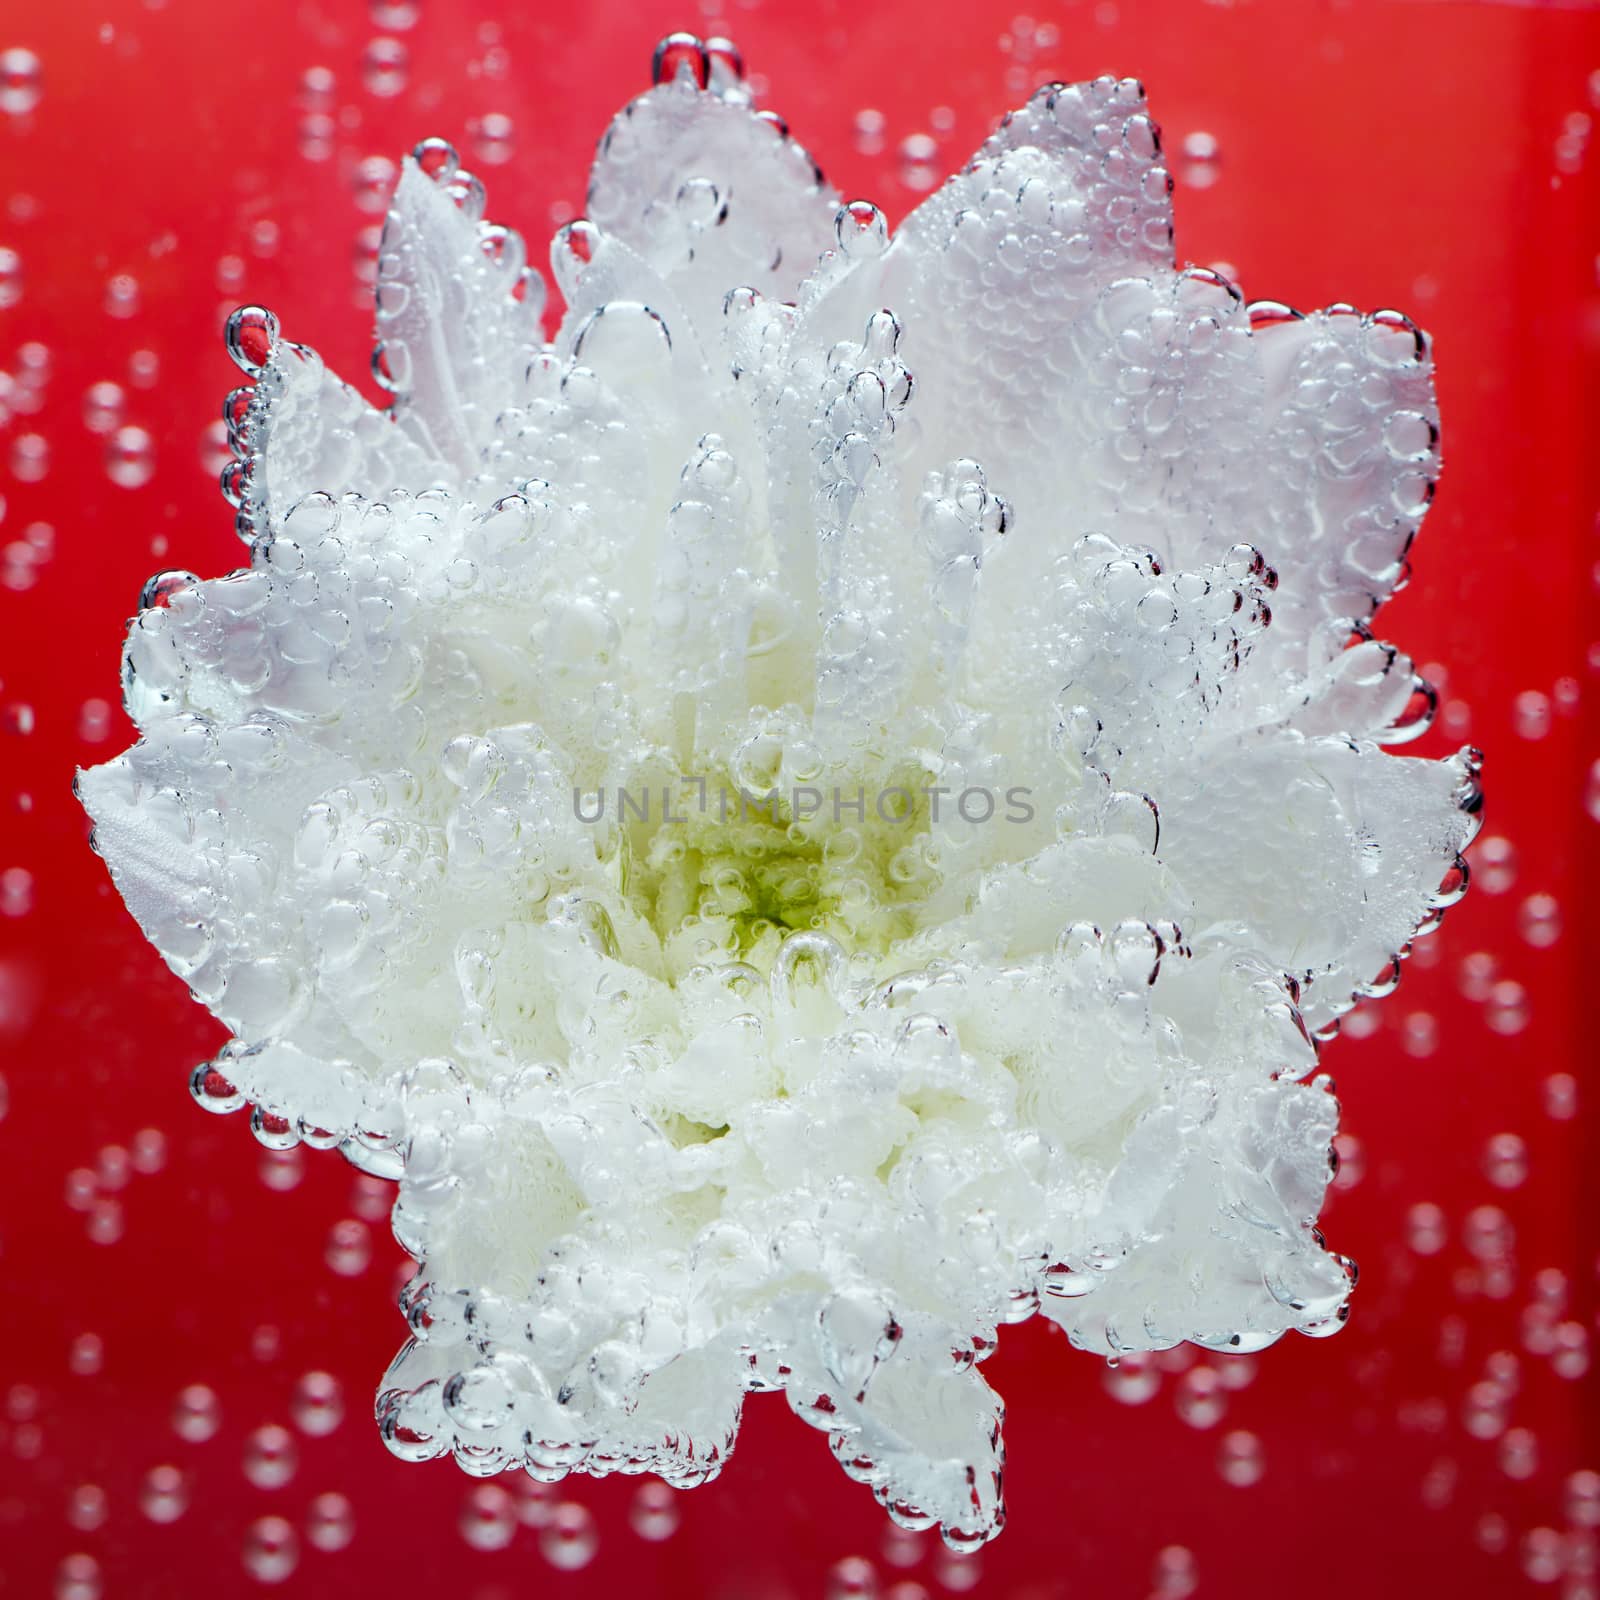 White chrysanthemum coverd by air bubbles underwater on red background with selective focus